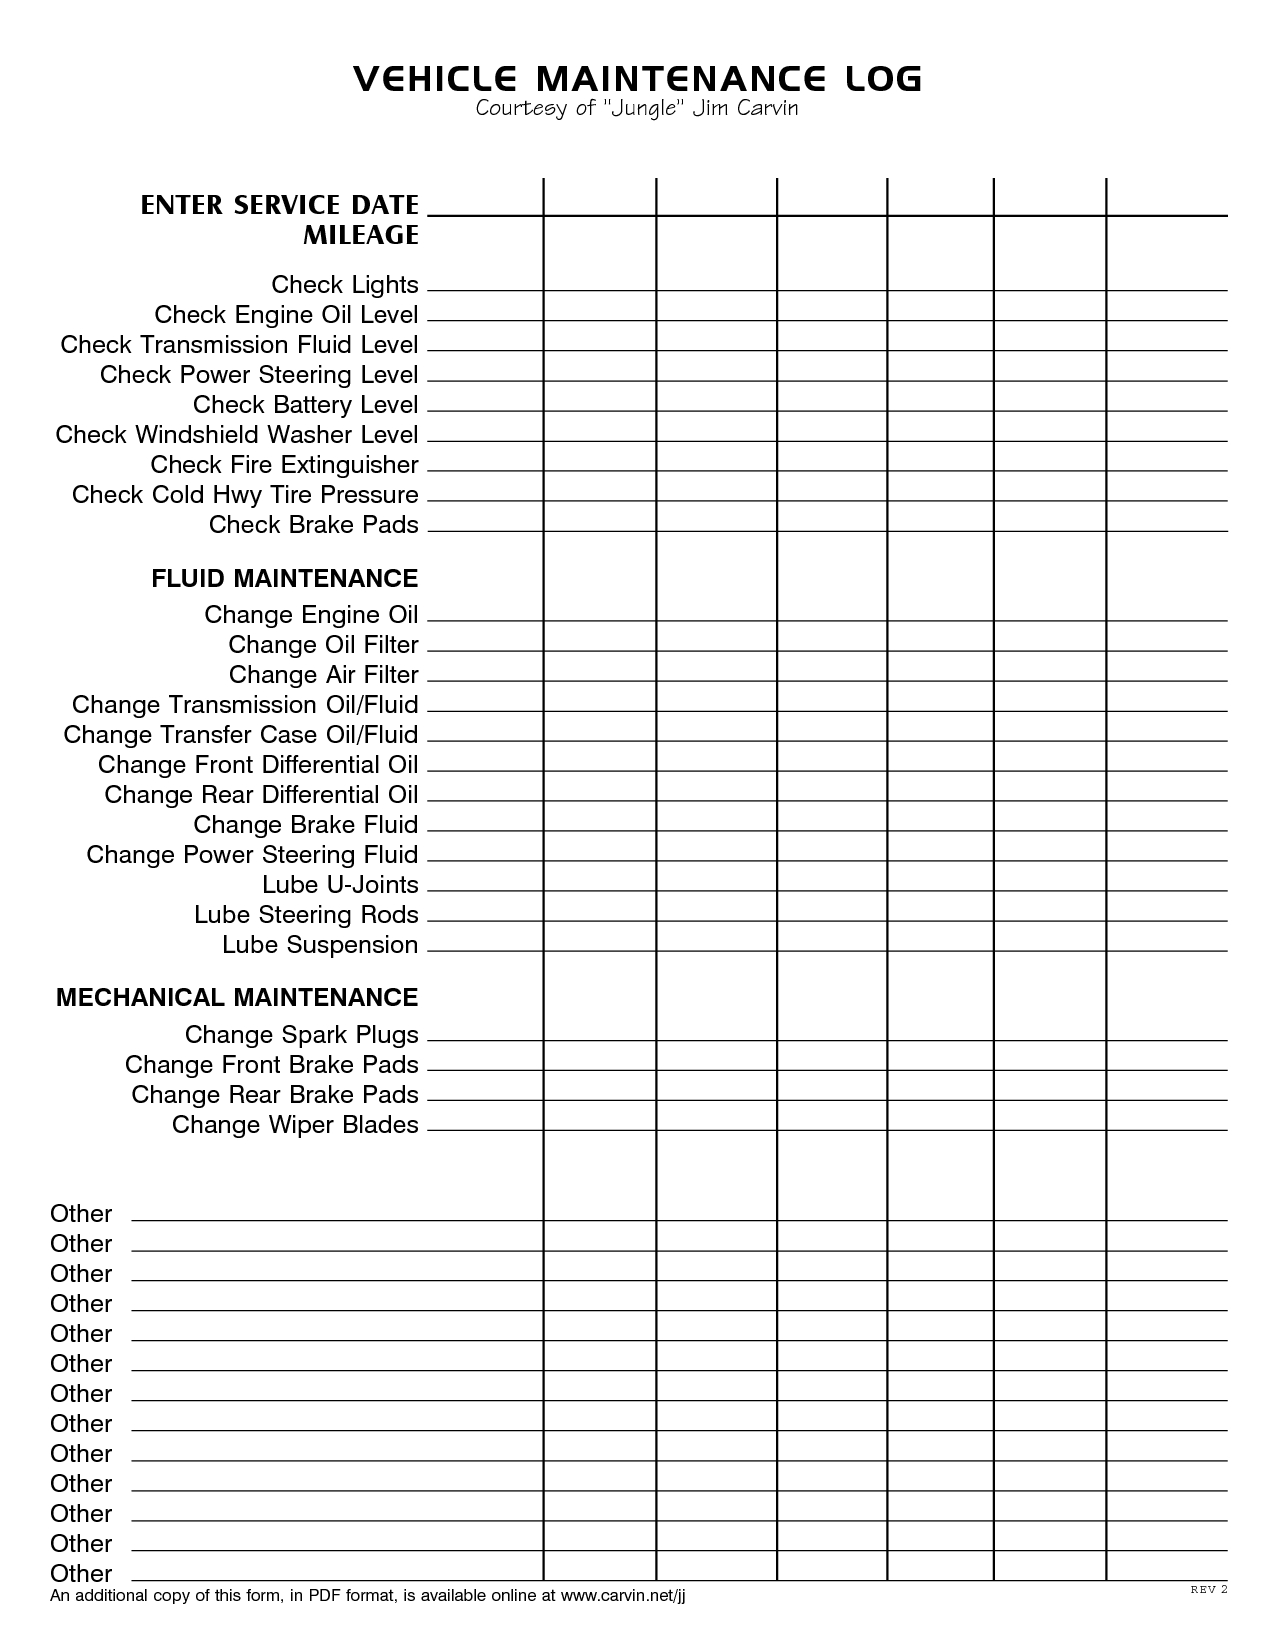 Vehicle Maintenance Log Book Template | Car Maintenance Tips ... Within Oil Change Excel Spreadsheet